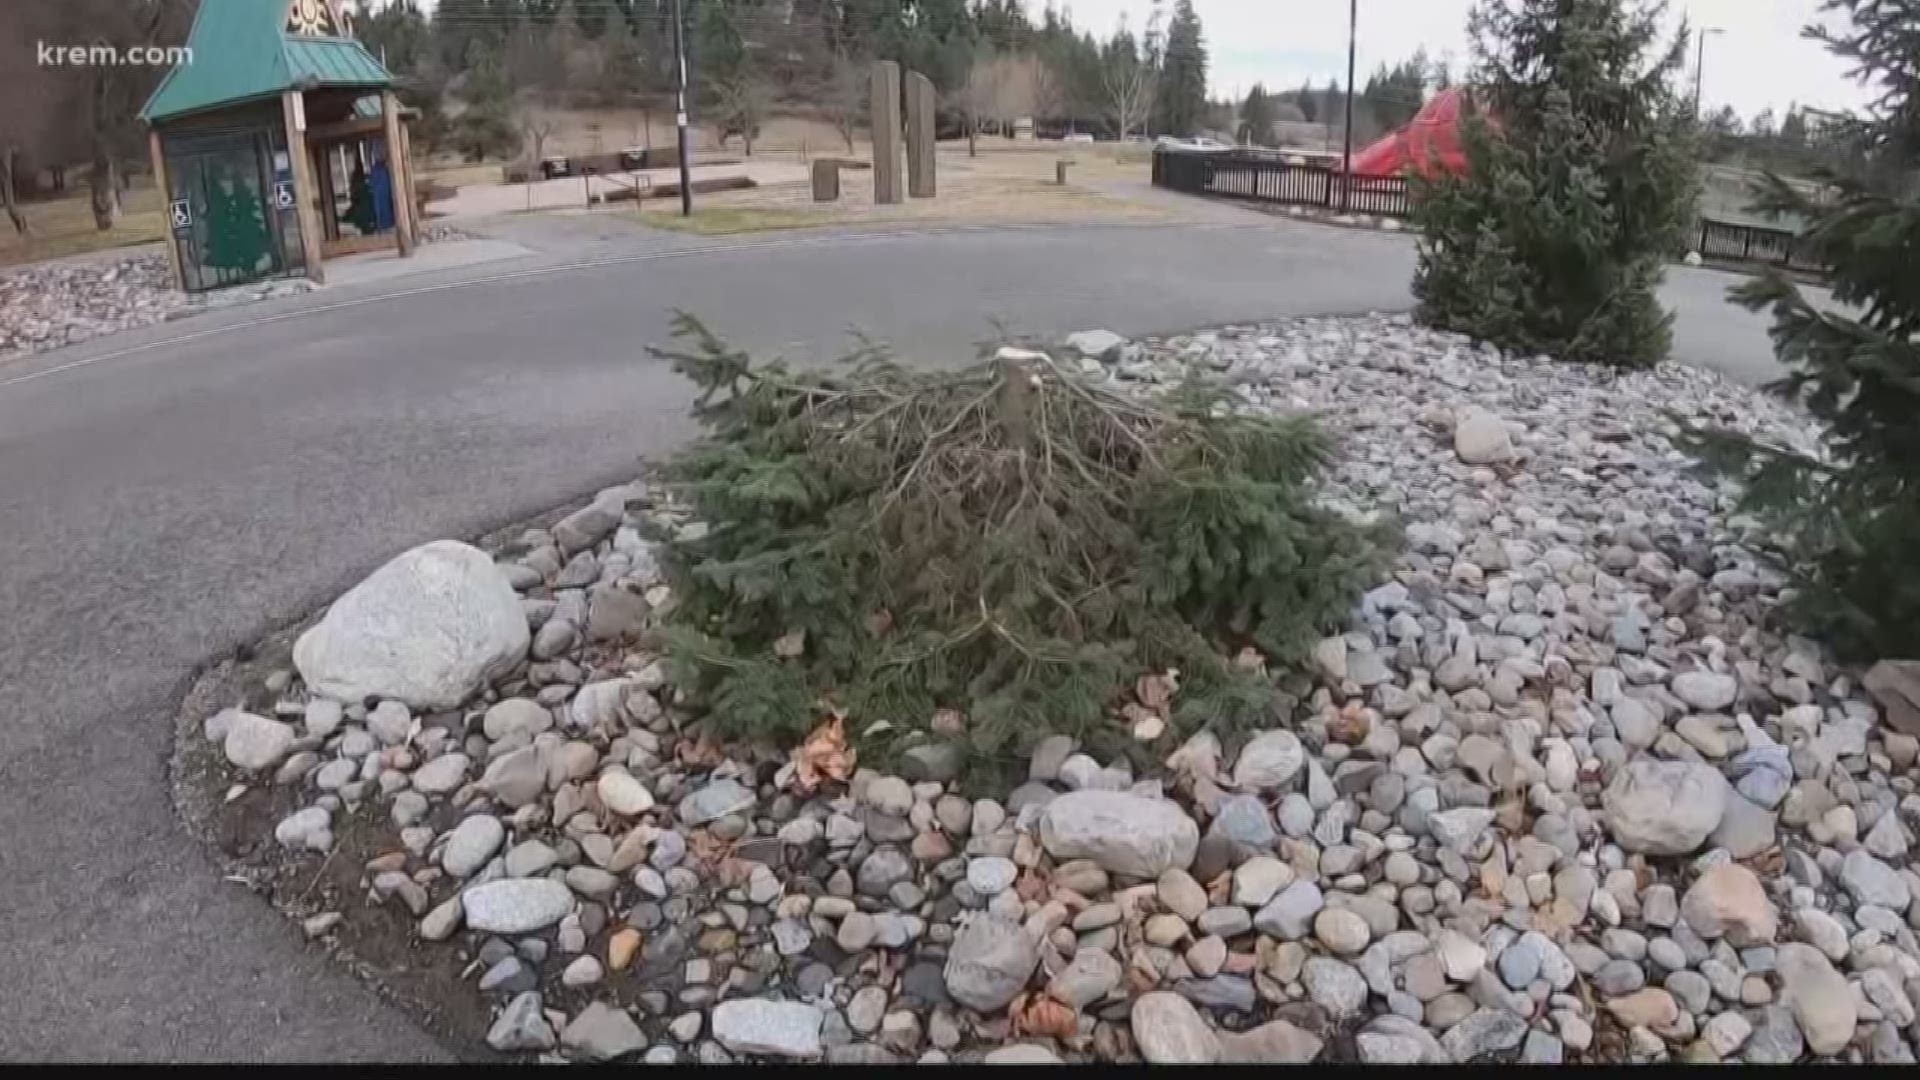 Someone stole a tree worth $2,000 from Coeur d'Alene's Cherry Hill Park. Fortunately, a resident with the same type of trees is offering to donate one to the city.